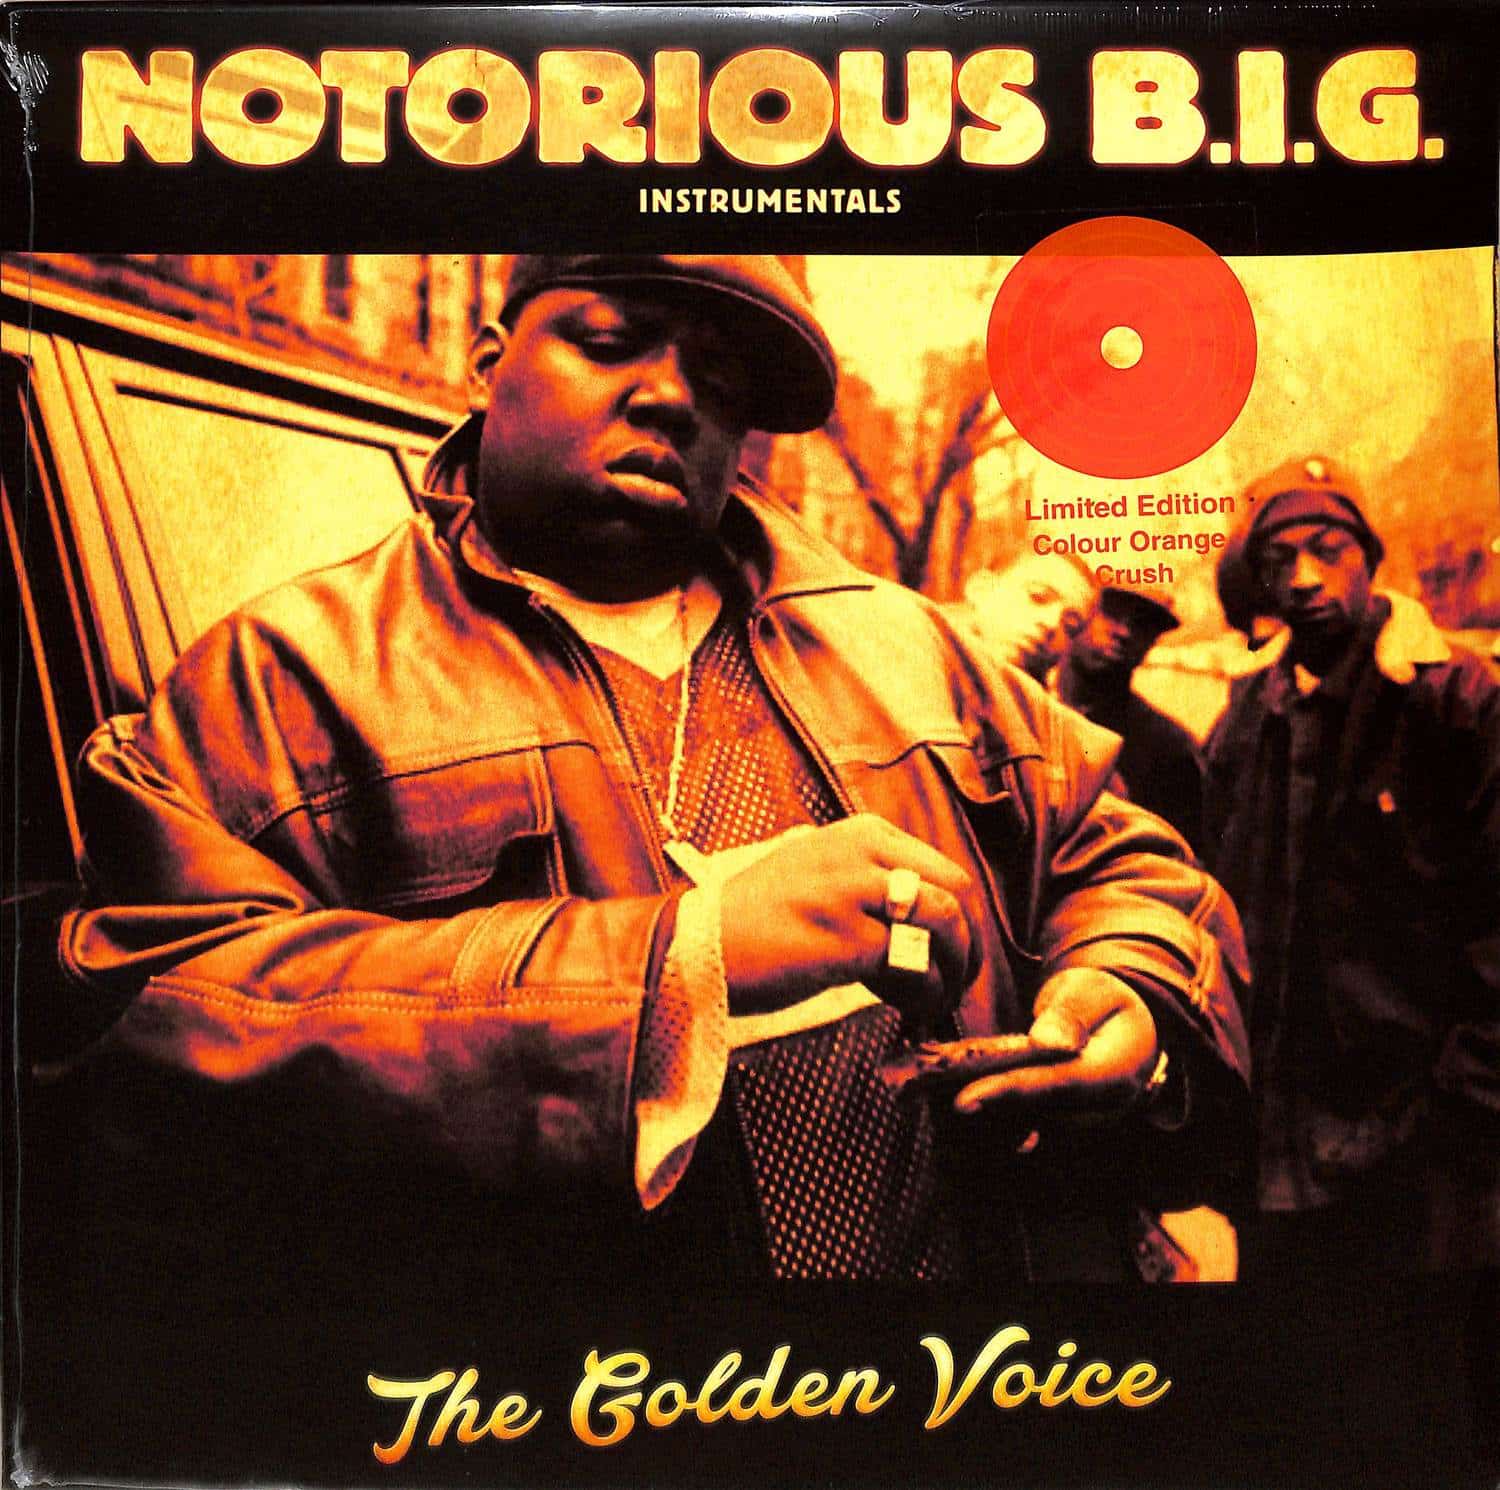 Notorious B.I.G. - THE GOLDEN VOICE 